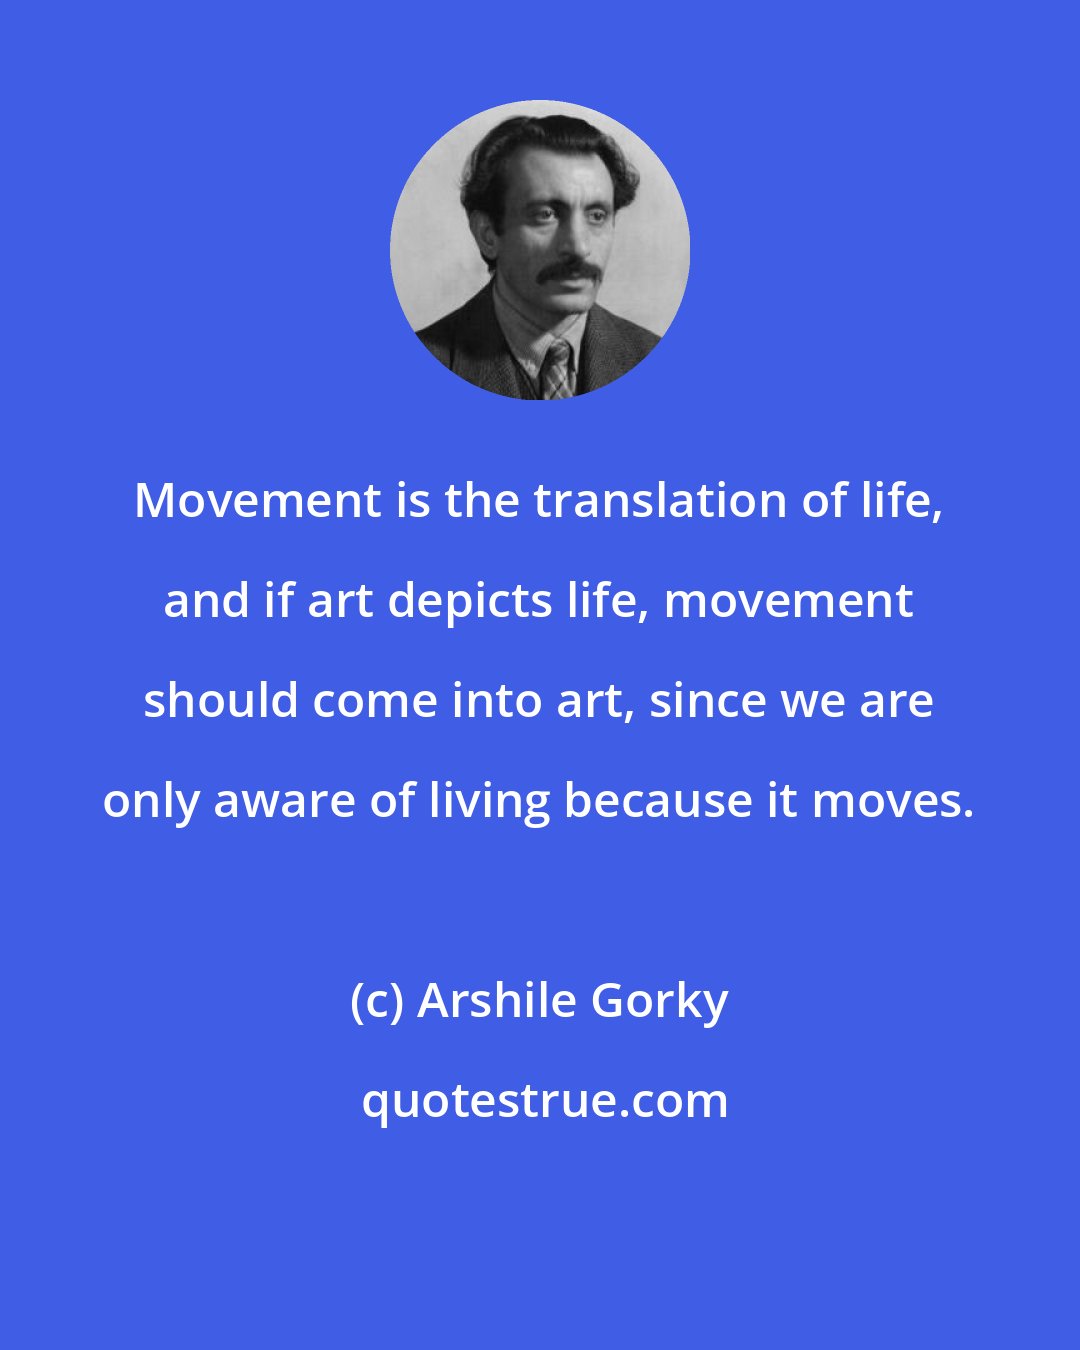 Arshile Gorky: Movement is the translation of life, and if art depicts life, movement should come into art, since we are only aware of living because it moves.